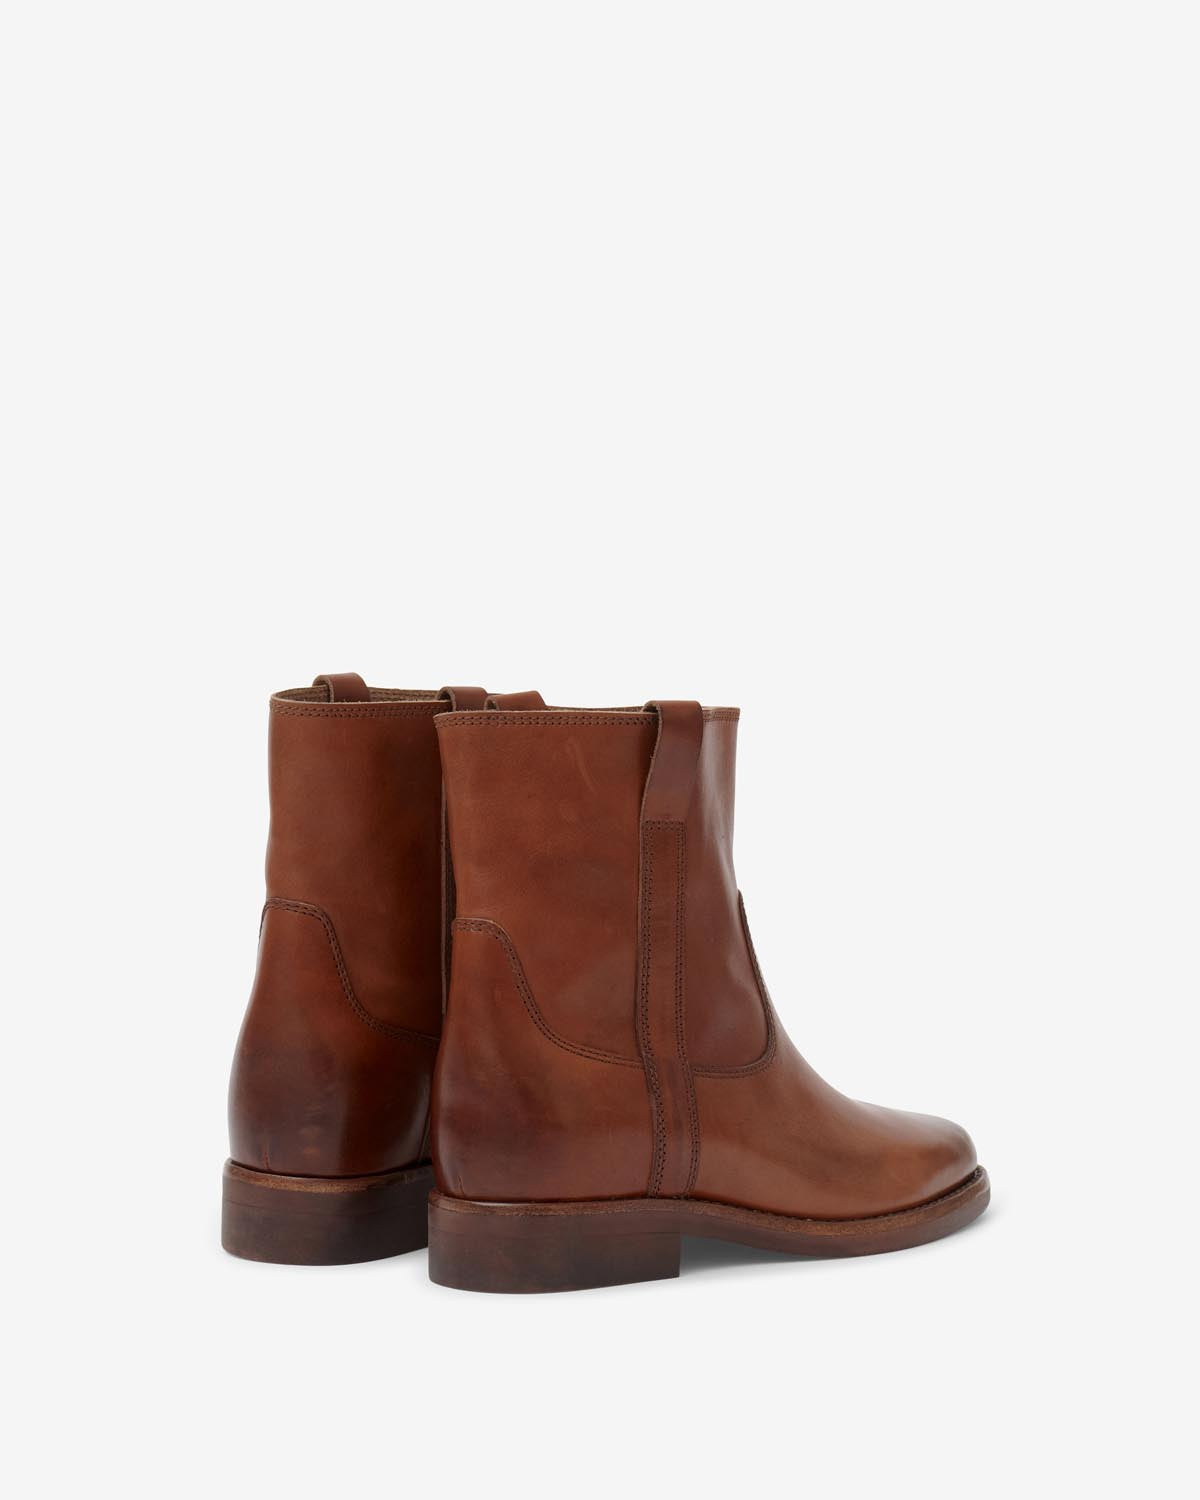 Boots susee Woman Cognac 2